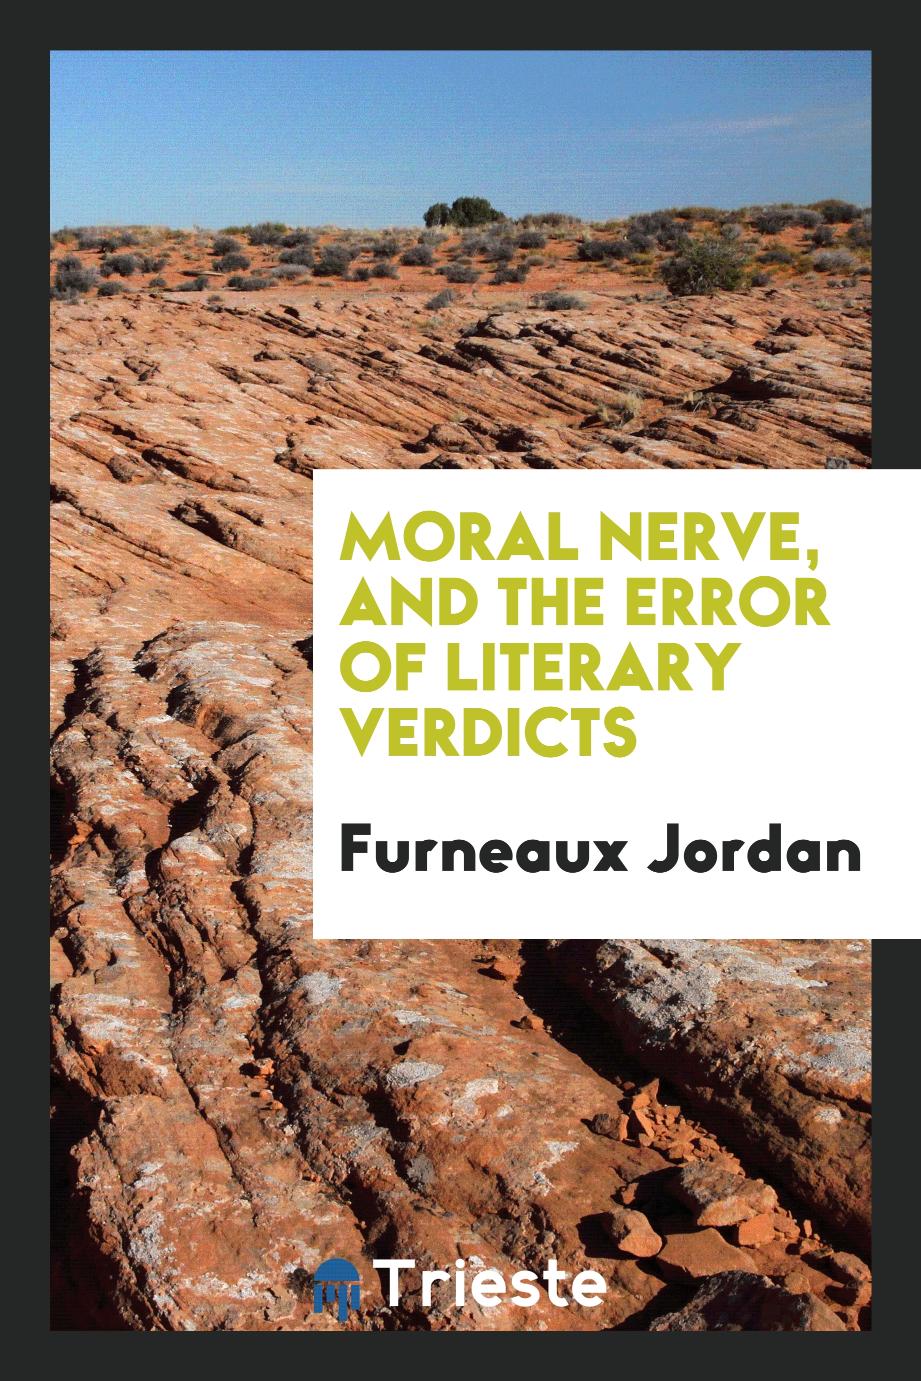 Moral nerve, and the error of literary verdicts